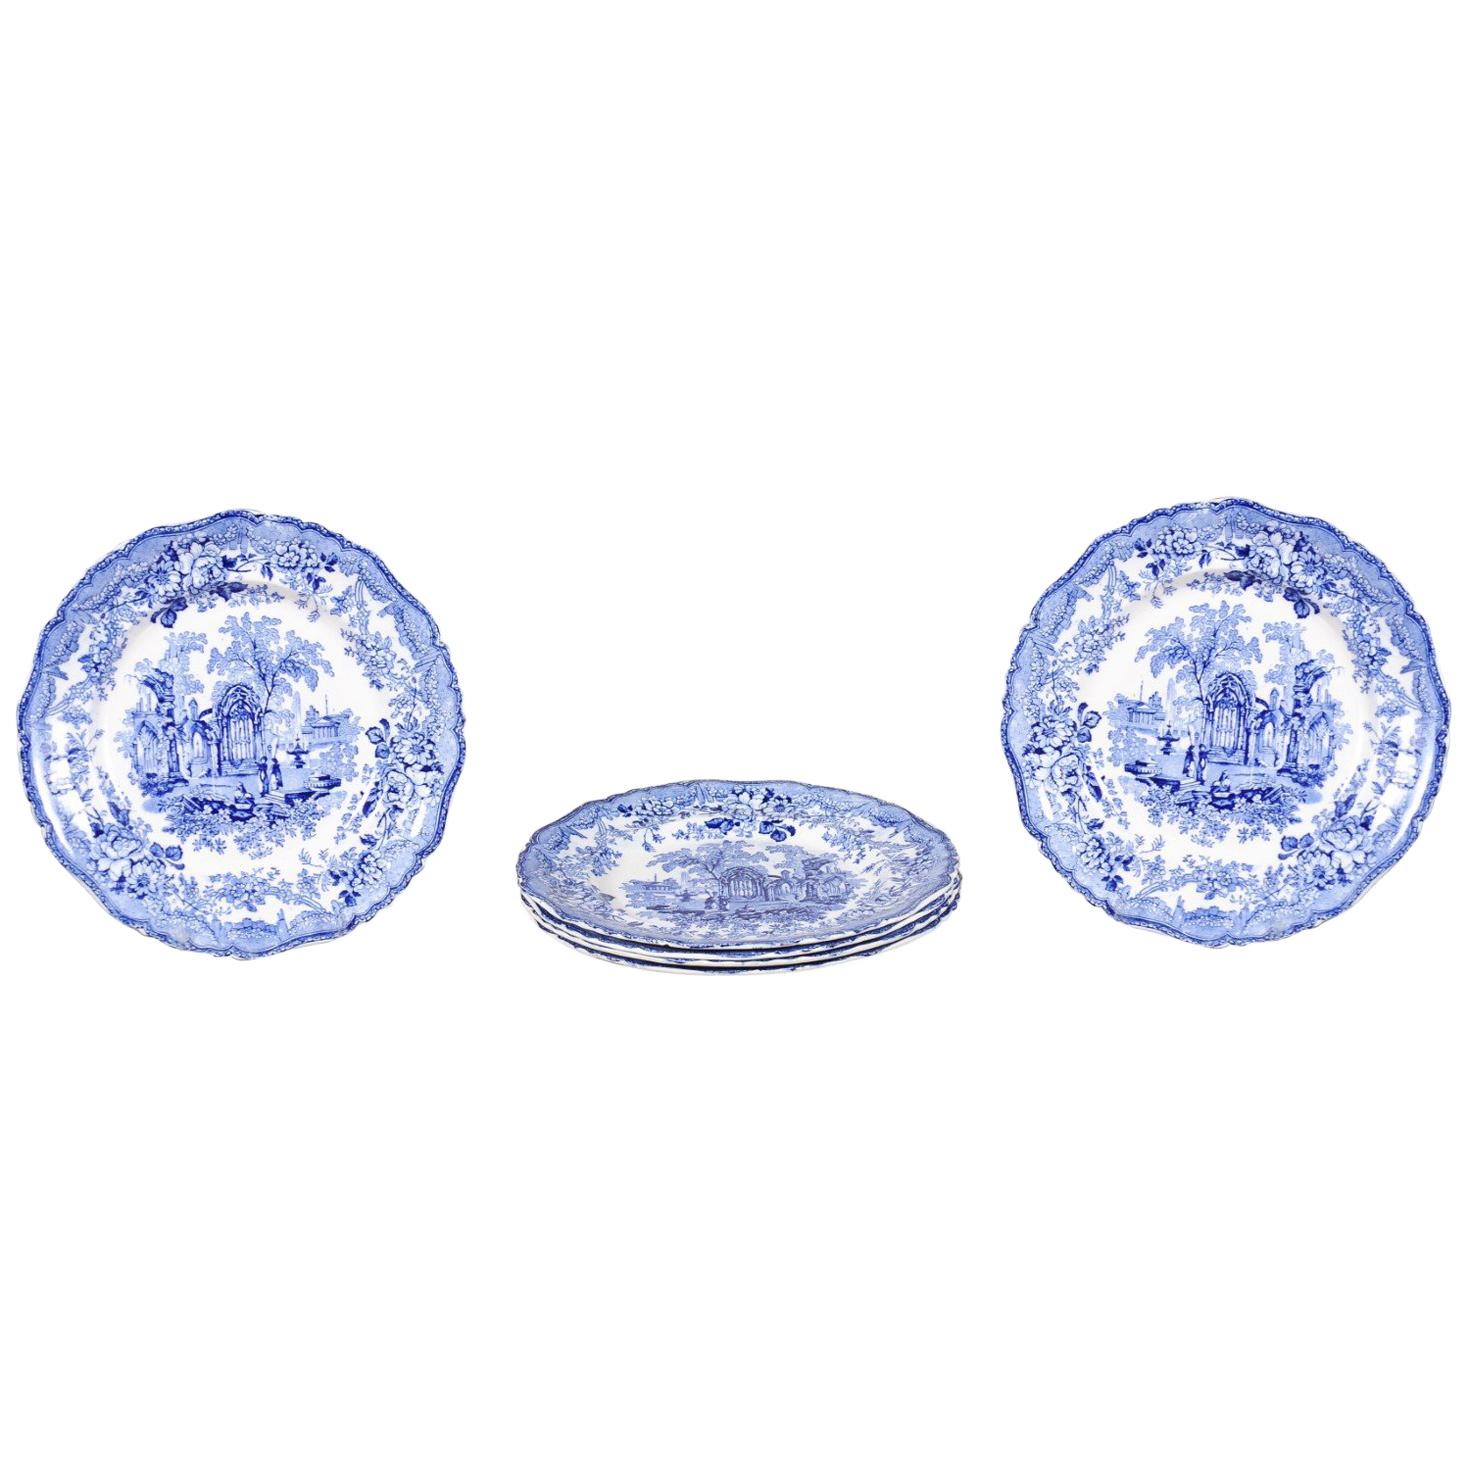 English Blue and White Transfer Plates with Gothic Ruins Motifs, 19th Century For Sale